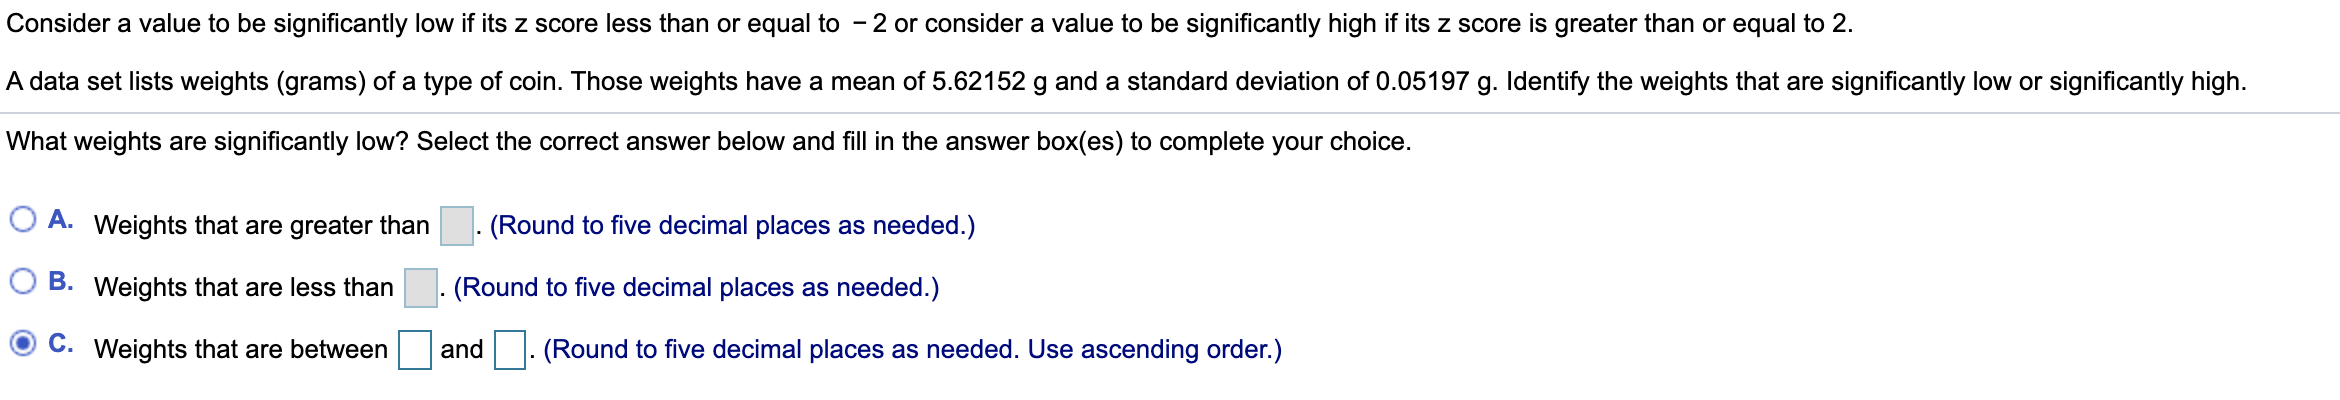 Consider a value to be significantly low if its z score less than or equal to - 2 or consider a value to be significantly high if its z score is greater than or equal to 2.
A data set lists weights (grams) of a type of coin. Those weights have a mean of 5.62152 g and a standard deviation of 0.05197 g. Identify the weights that are significantly low or significantly high.
What weights are significantly low? Select the correct answer below and fill in the answer box(es) to complete your choice.
O A. Weights that are greater than
. (Round to five decimal places as needed.)
(Round to five decimal places as needed.)
B. Weights that are less than
C. Weights that are between
and. (Round to five decimal places as needed. Use ascending order.)
